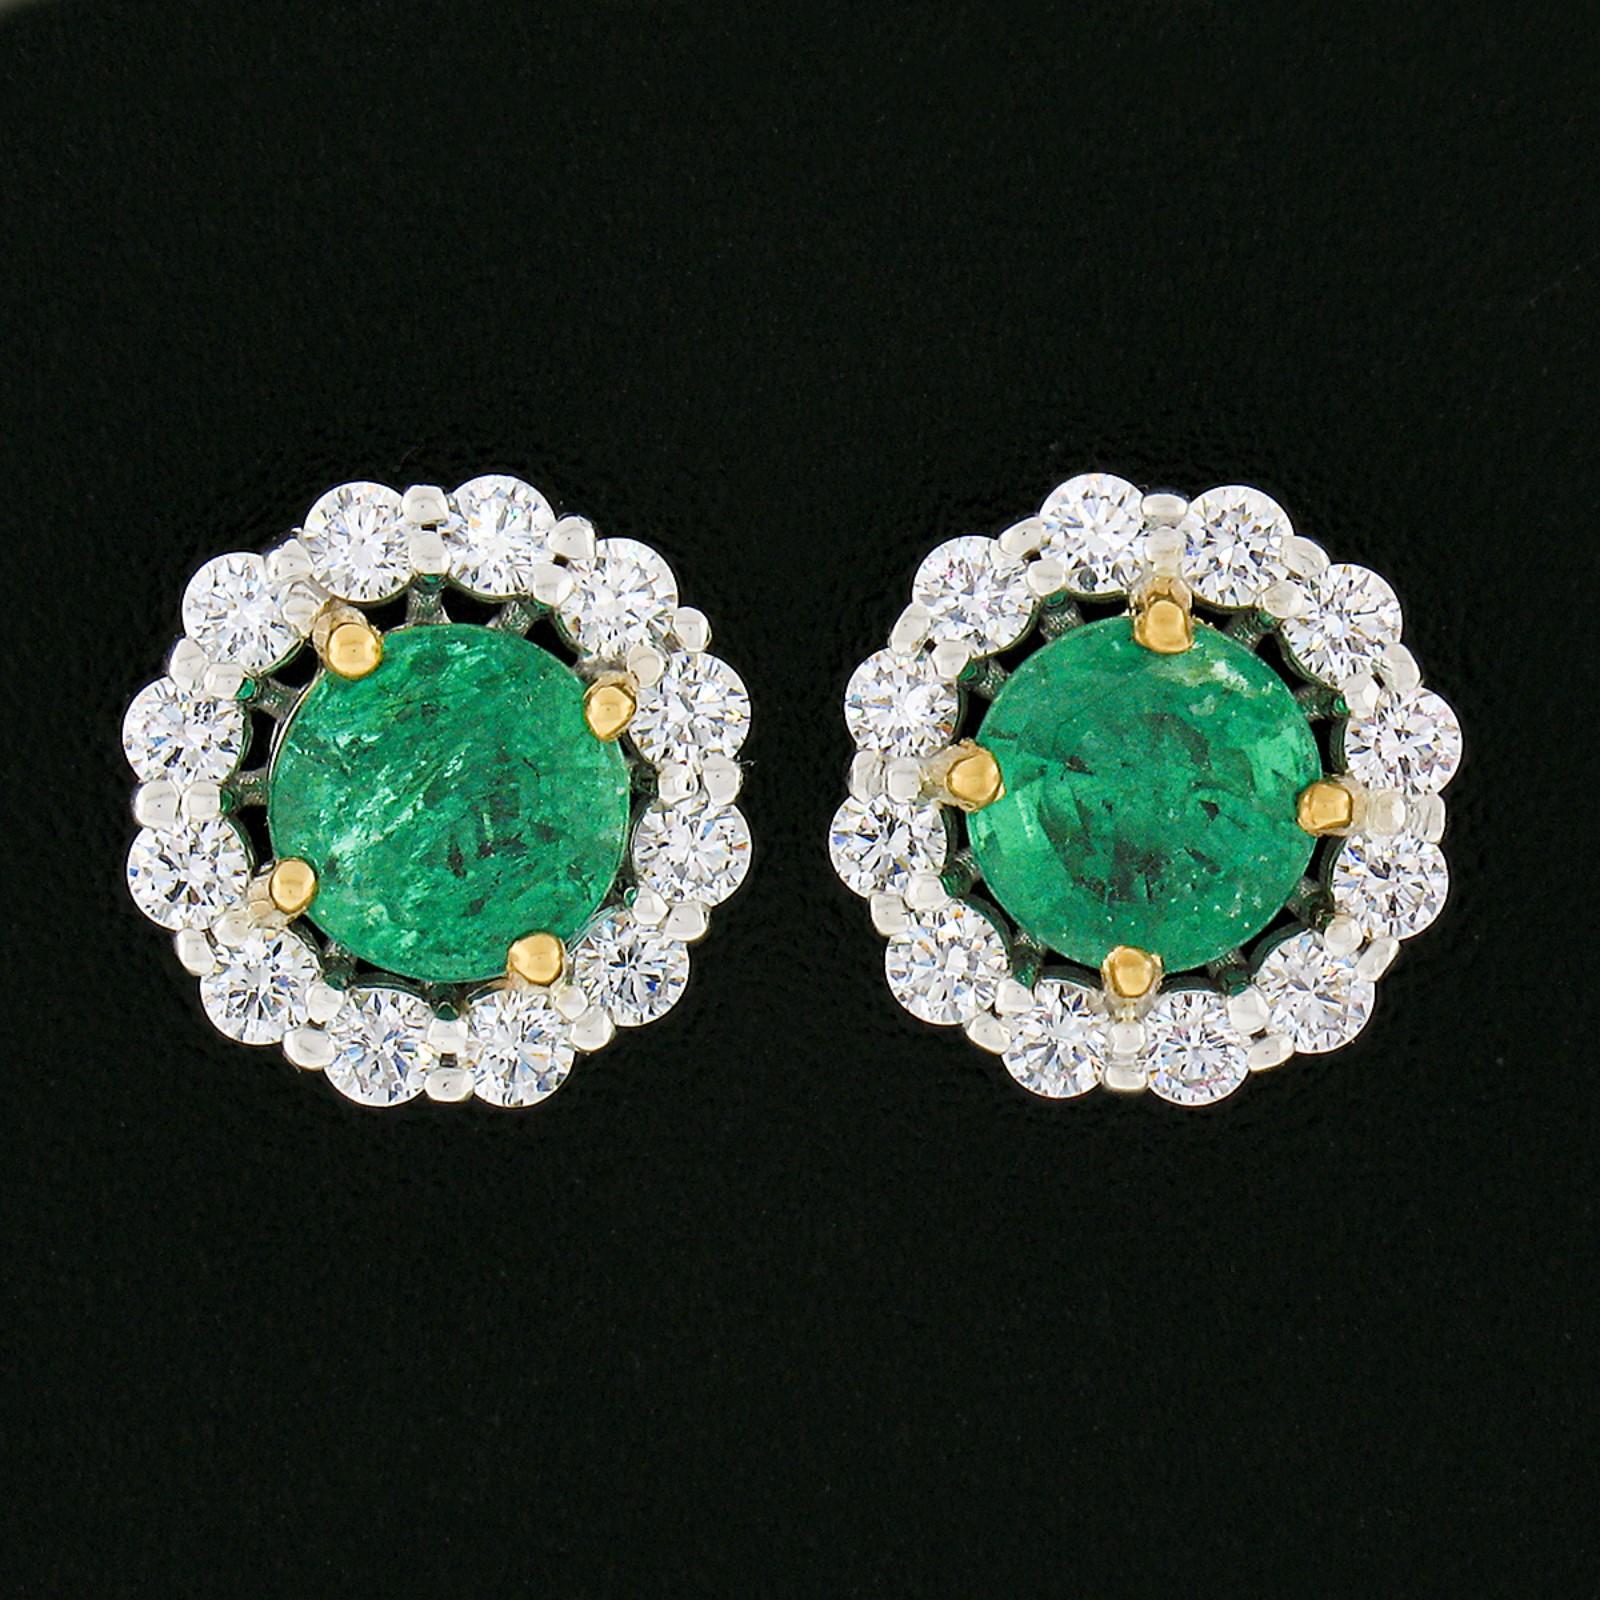 This gorgeous pair of custom made emerald and diamond halo stud earrings is newly crafted in solid 18k white gold with a yellow gold center. Each earring features a stunning natural emerald stone neatly prong set at its center having a rare round